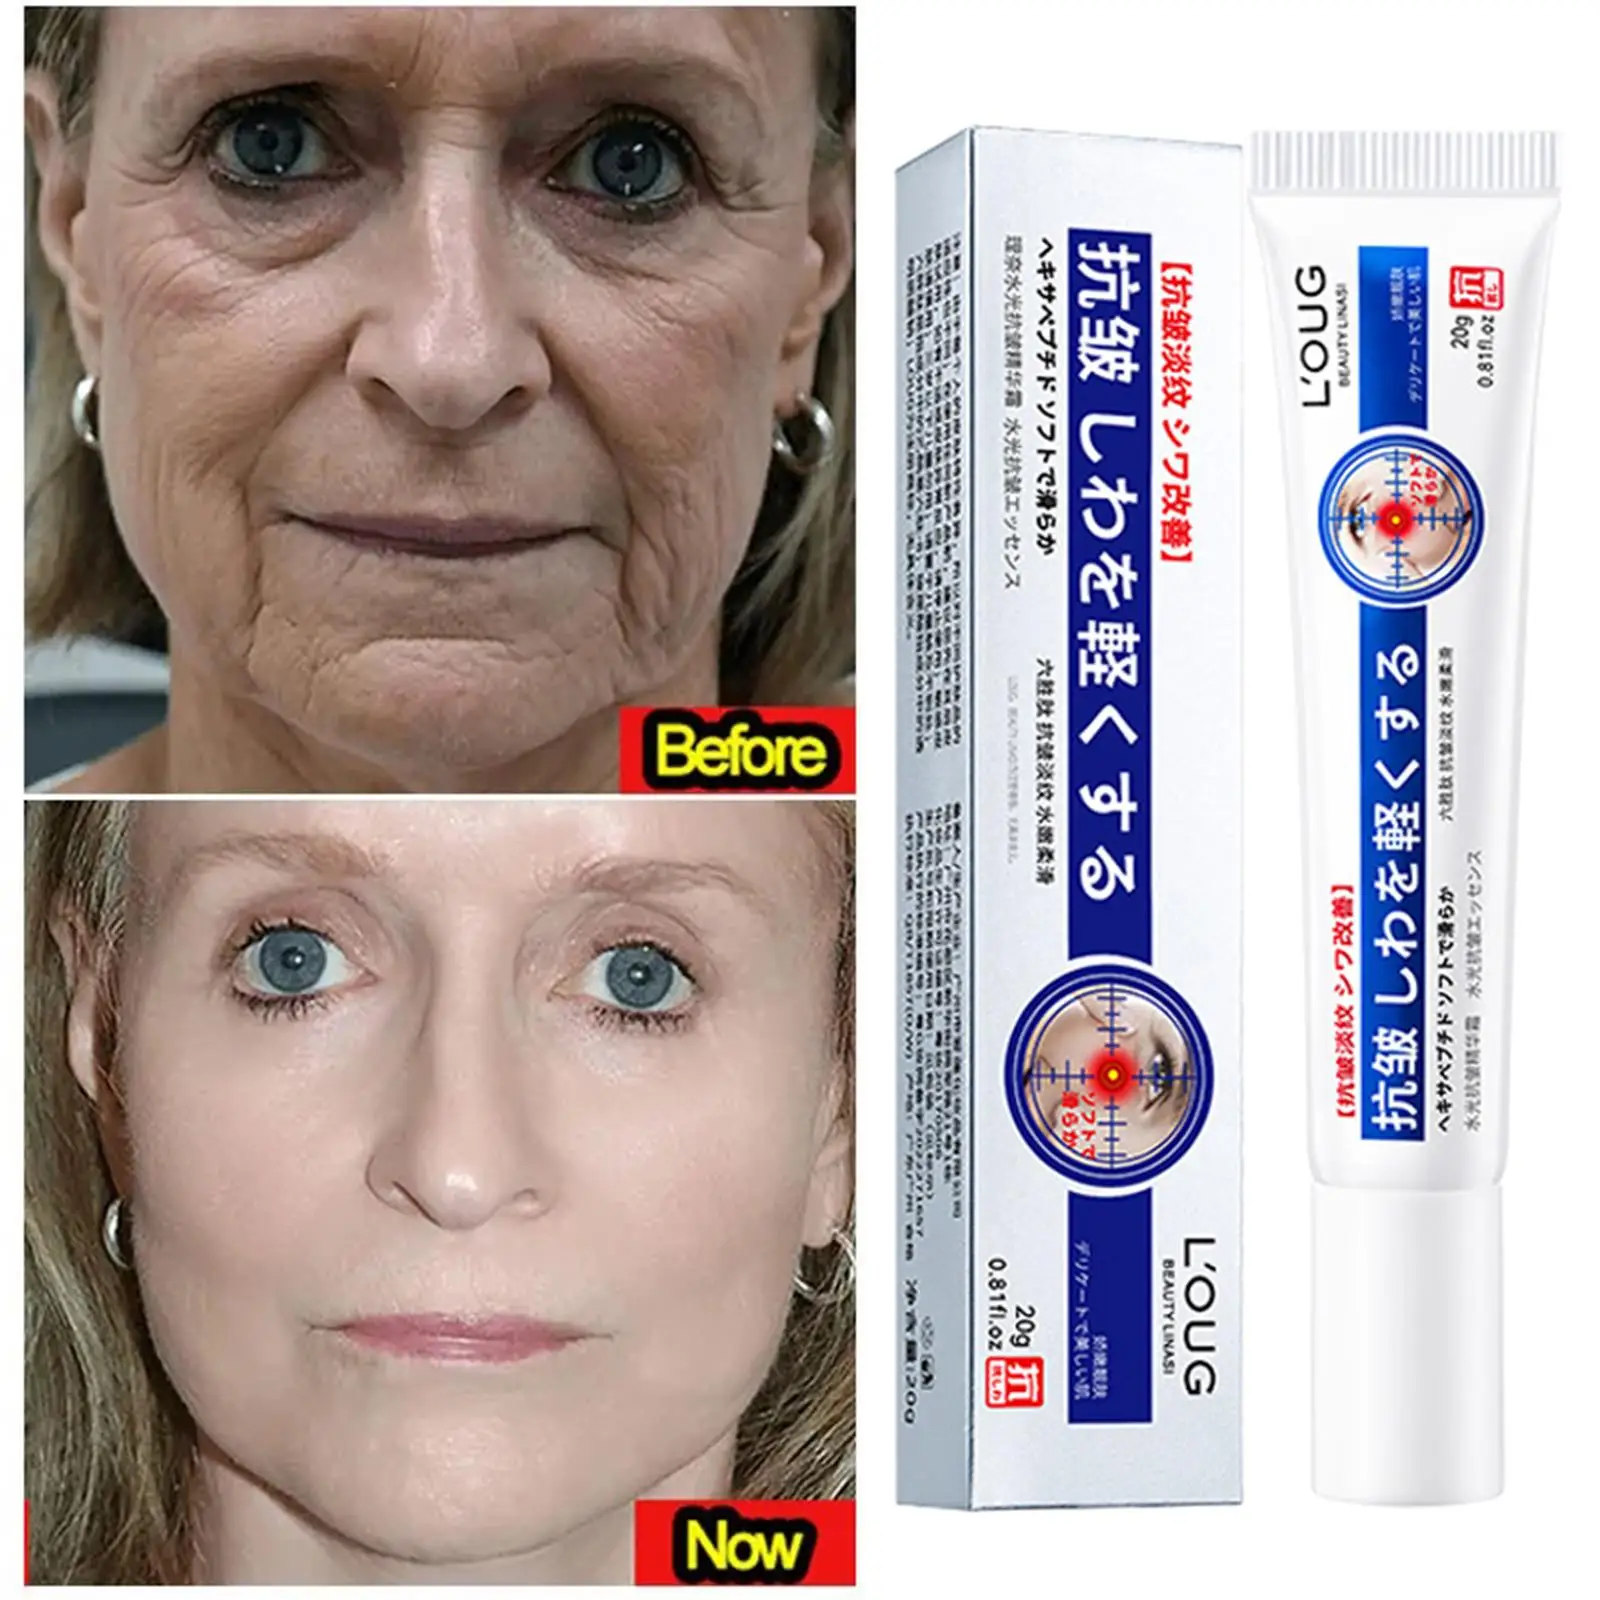 

Instant Wrinkle Remover Face Cream Lift Firm Anti-Aging Fade Fine Lines Tighten Product Moisturizer Brighten Skin Care Cosmetics